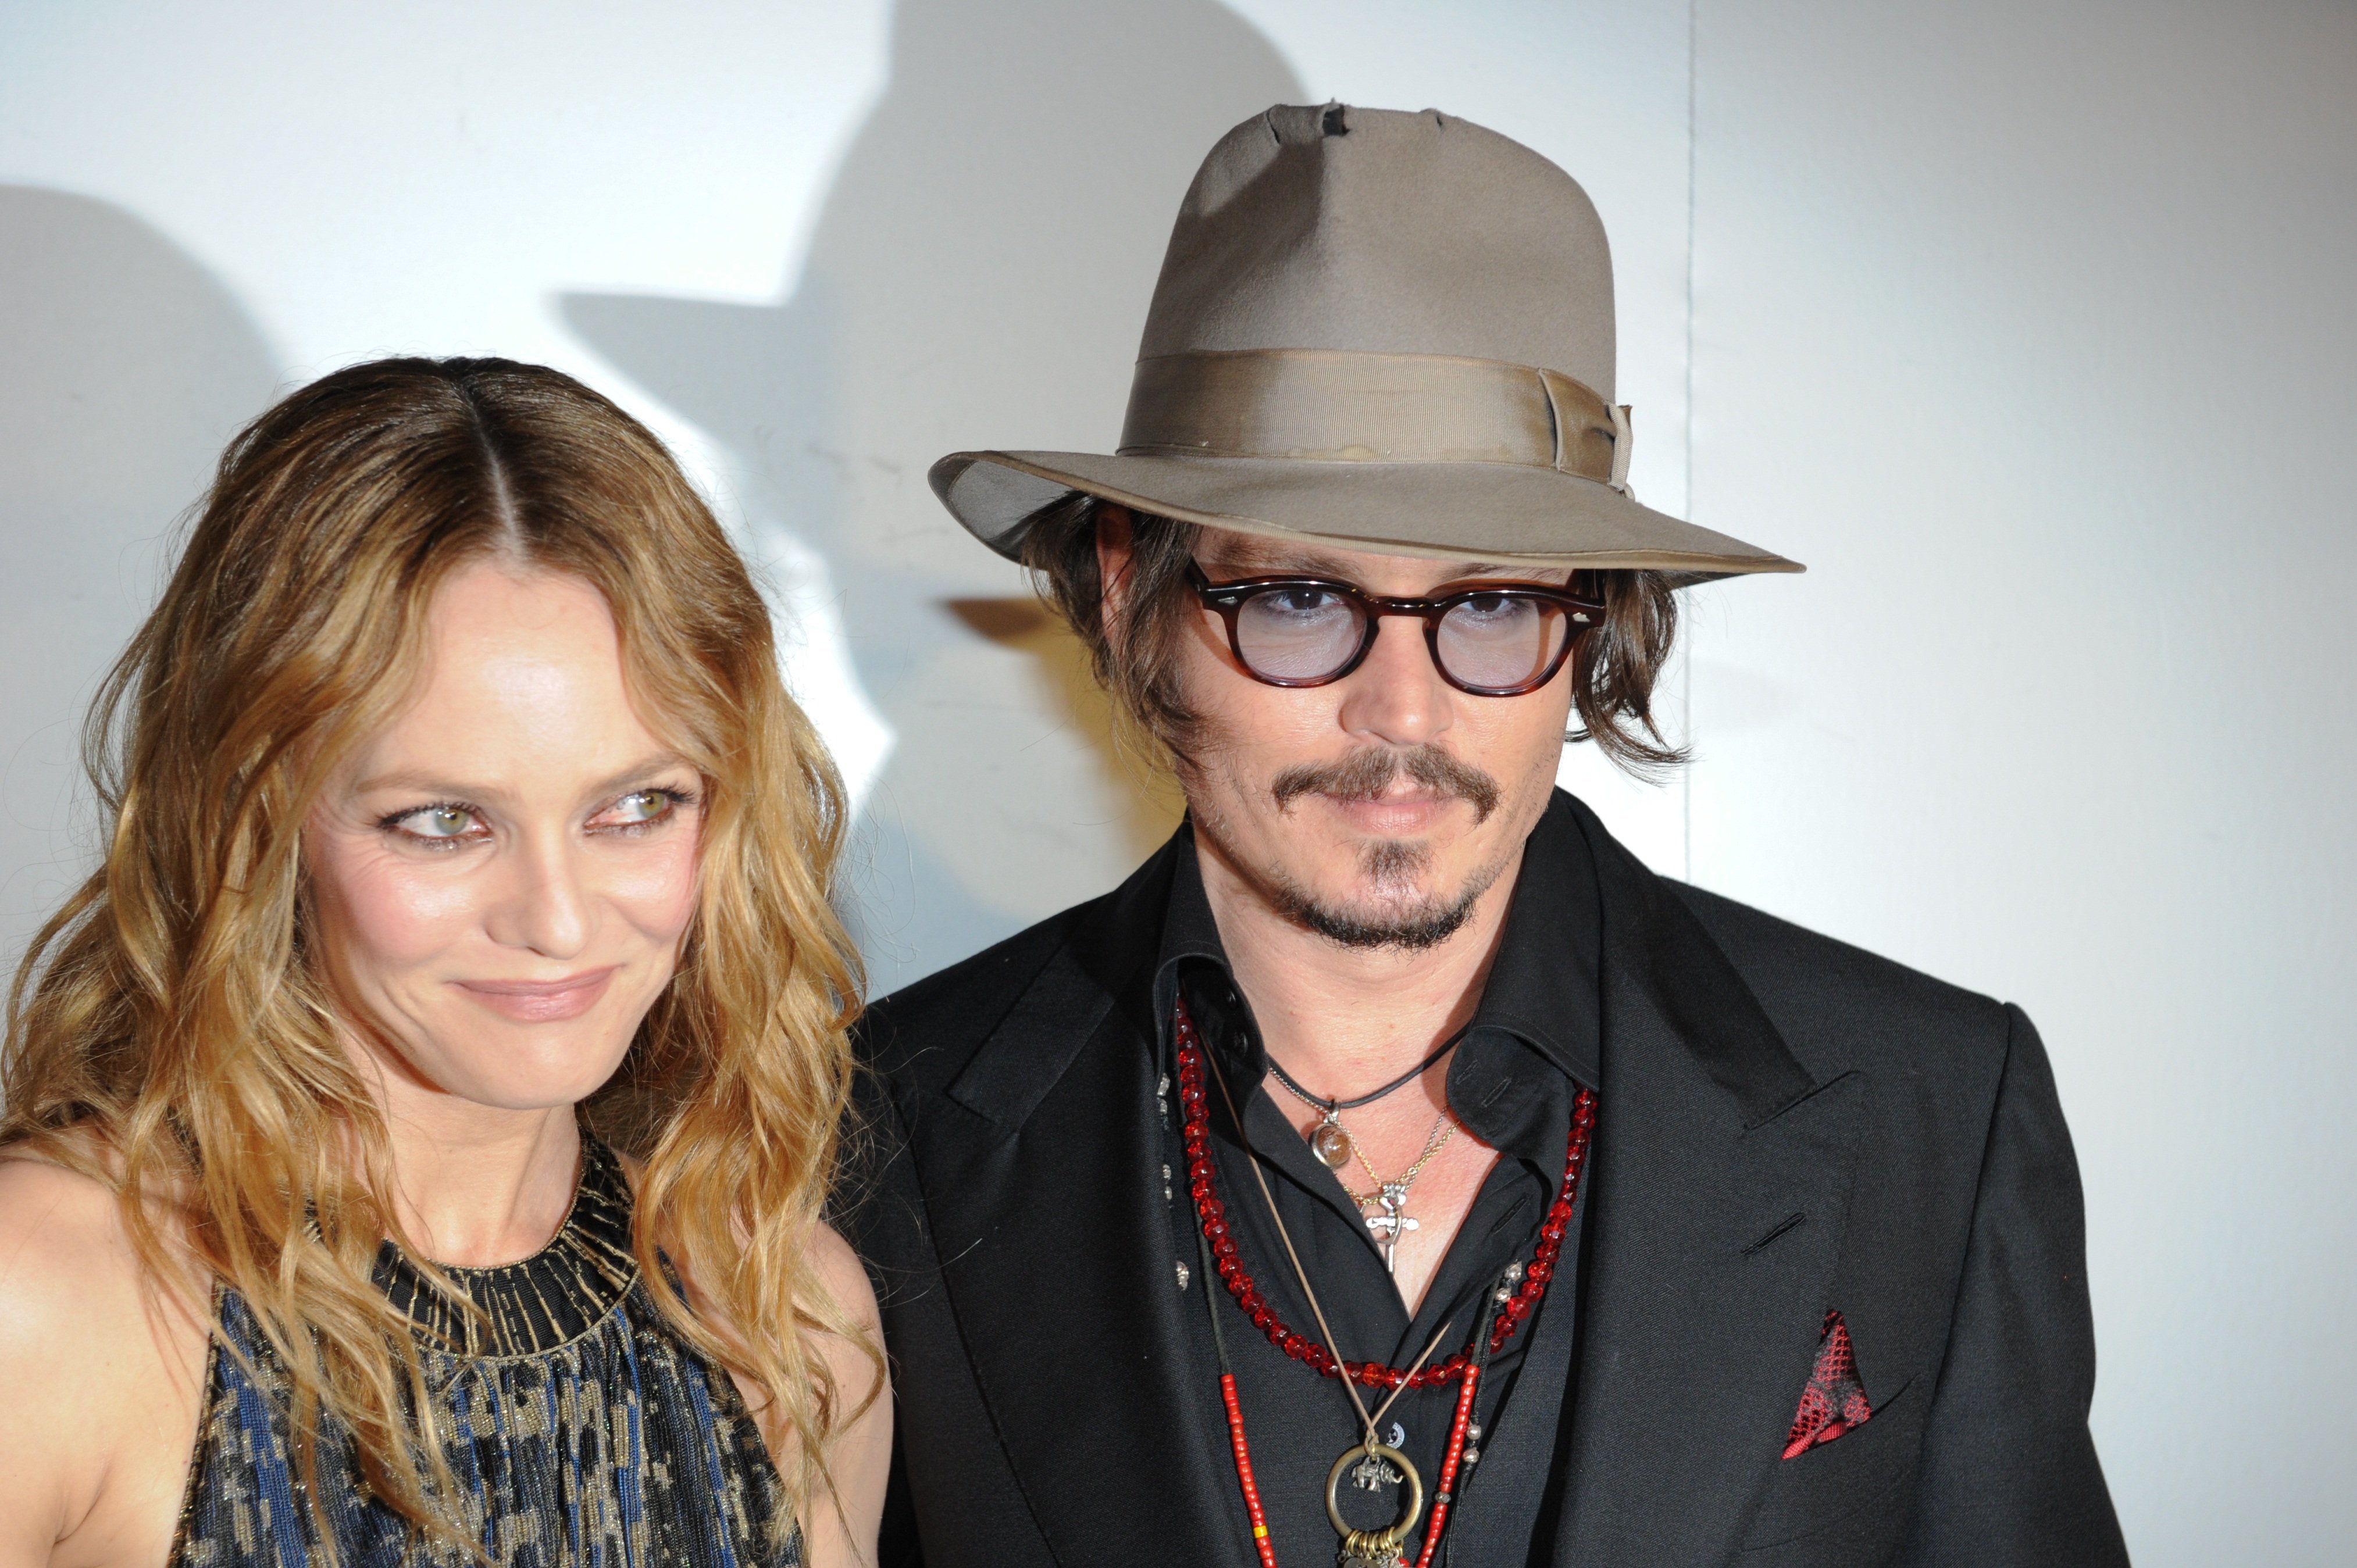 Johnny Depp and Vanessa Paradis in Cannes, France in 2010 | Source: Getty Images